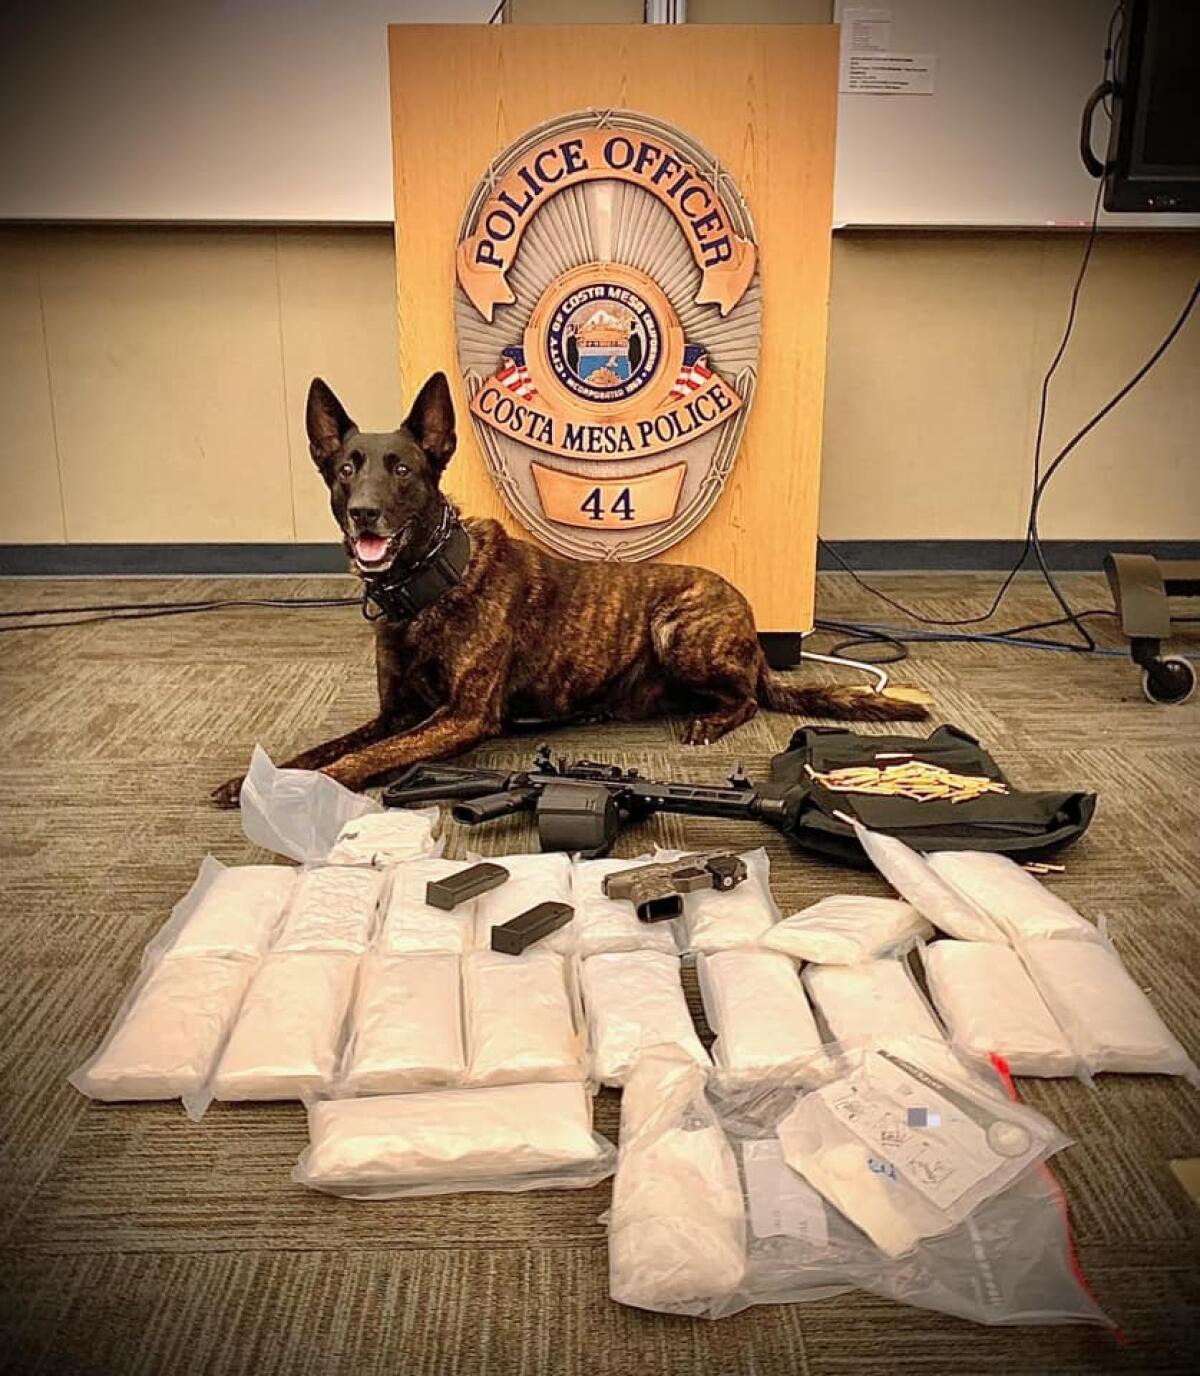 A traffic stop in Costa Mesa led to the seizure of methamphetamine, an assault rifle, ghost gun and body armor.